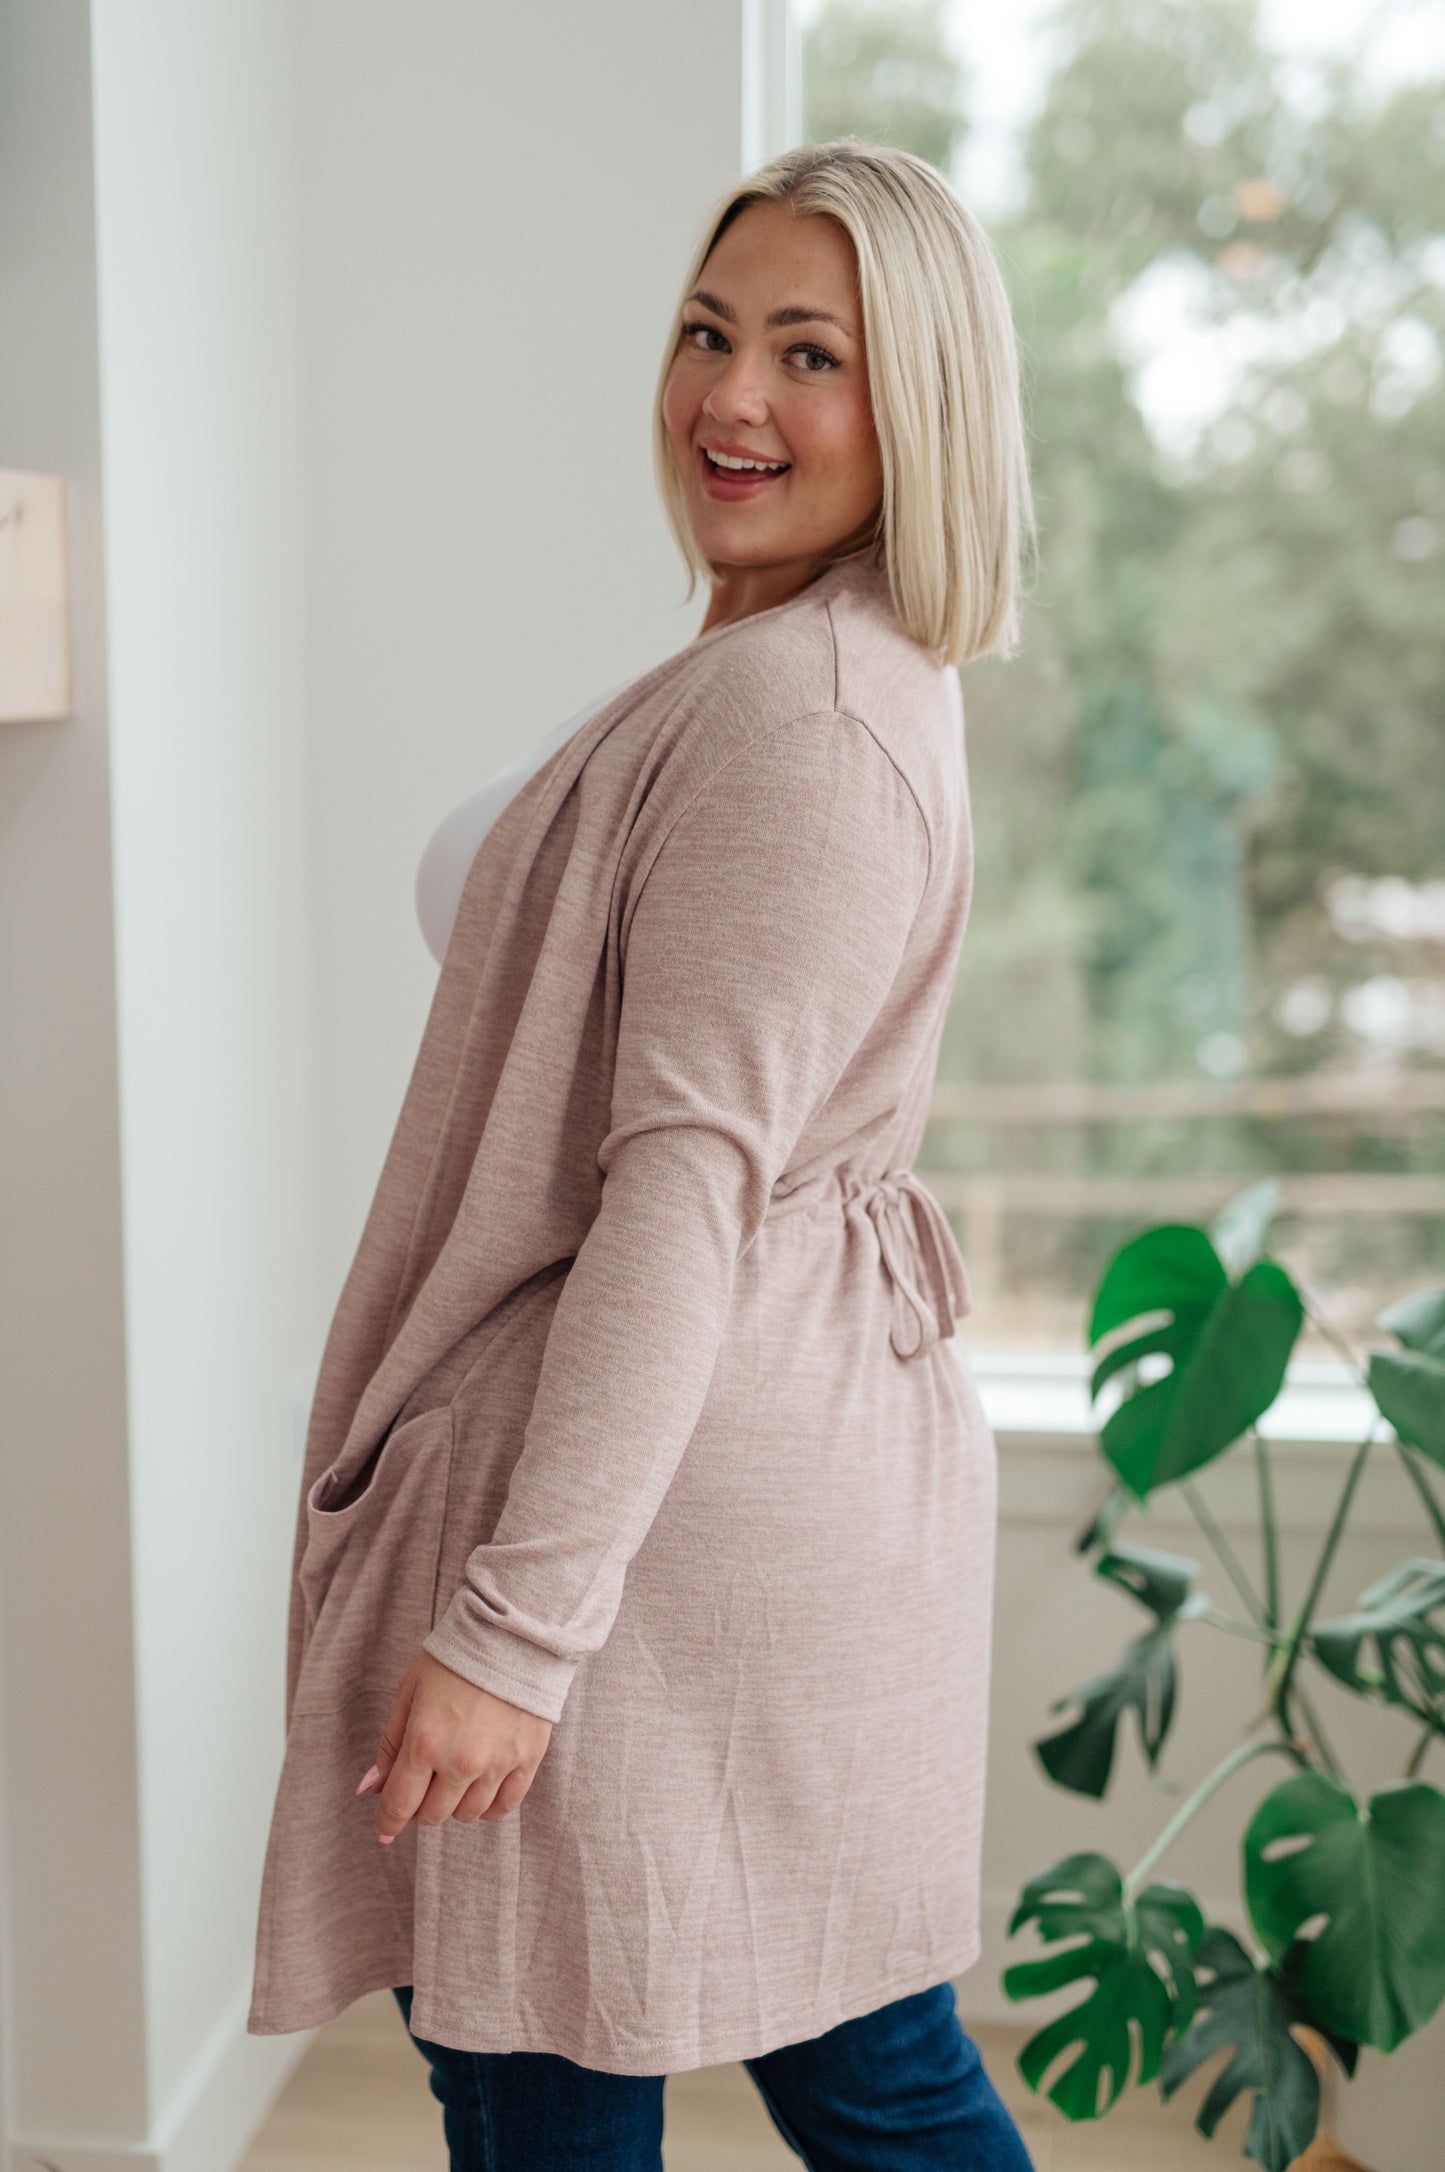 Our Staying Hopeful Cardigan is the perfect lightweight layer to add to your wardrobe. It features a sweater knit construction and an open front, with a drawstring in the back to cinch the waist for a more flattering shape. Perfect for cool days and evenings.